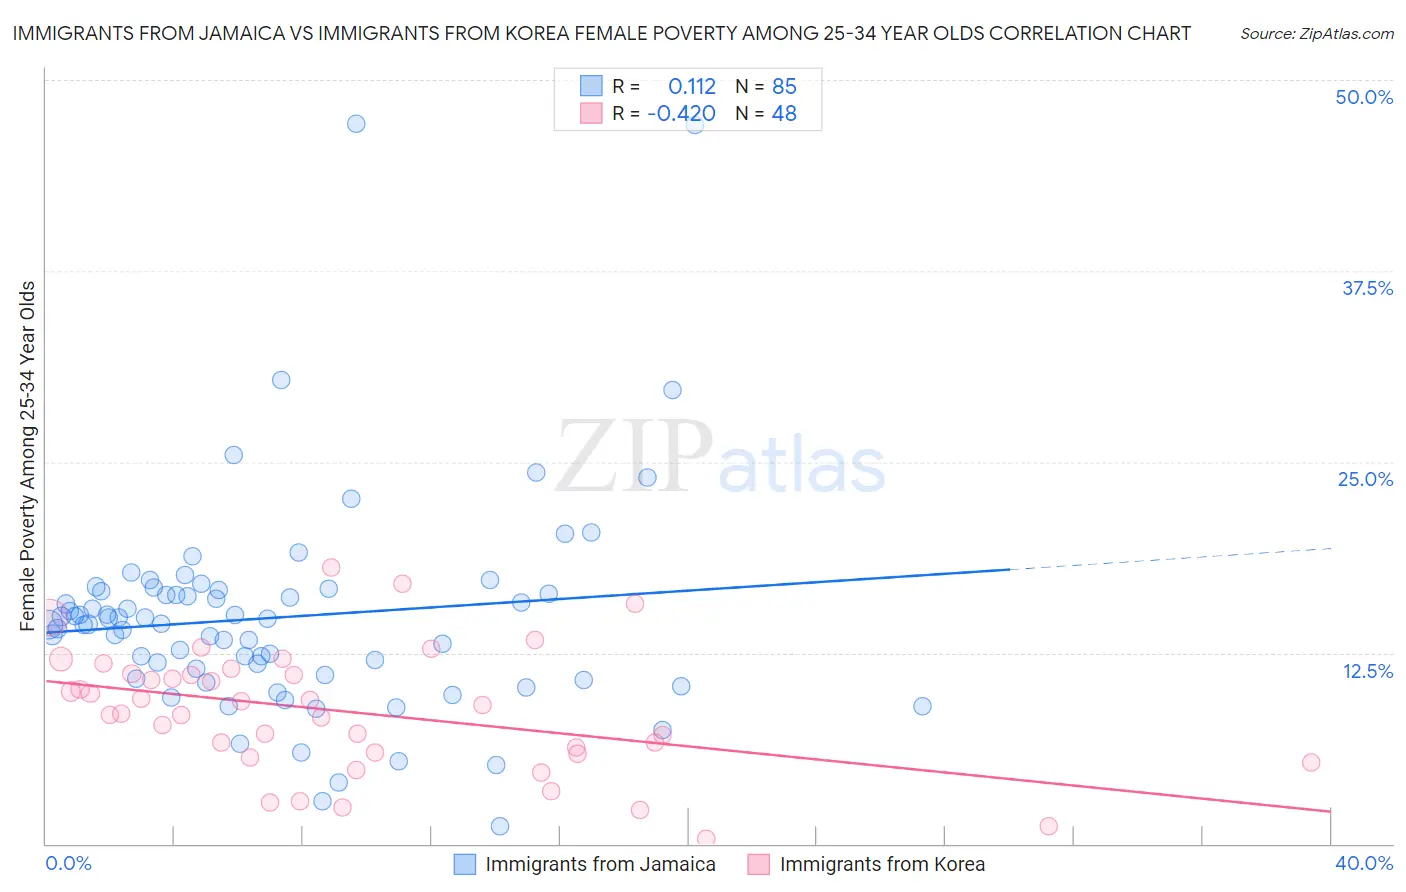 Immigrants from Jamaica vs Immigrants from Korea Female Poverty Among 25-34 Year Olds